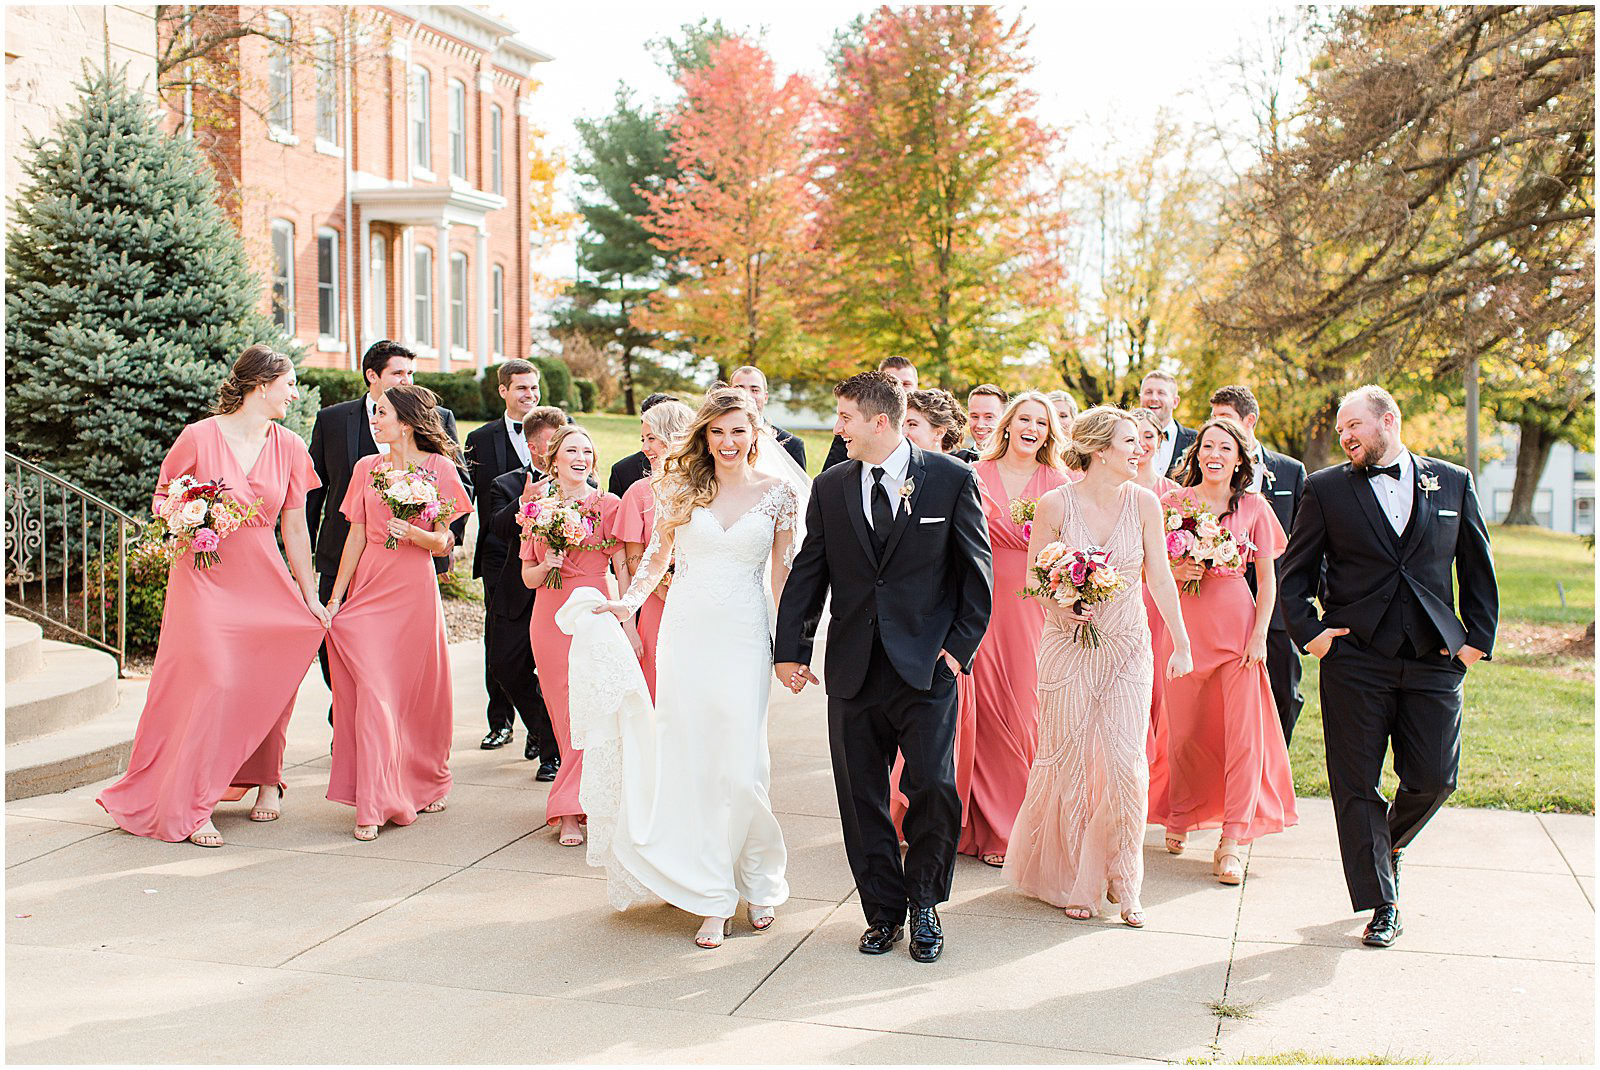 A Romantic Fall Wedding in Ferdinand, IN | Tori and Kyle | Bret and Brandie Photography 0101.jpg